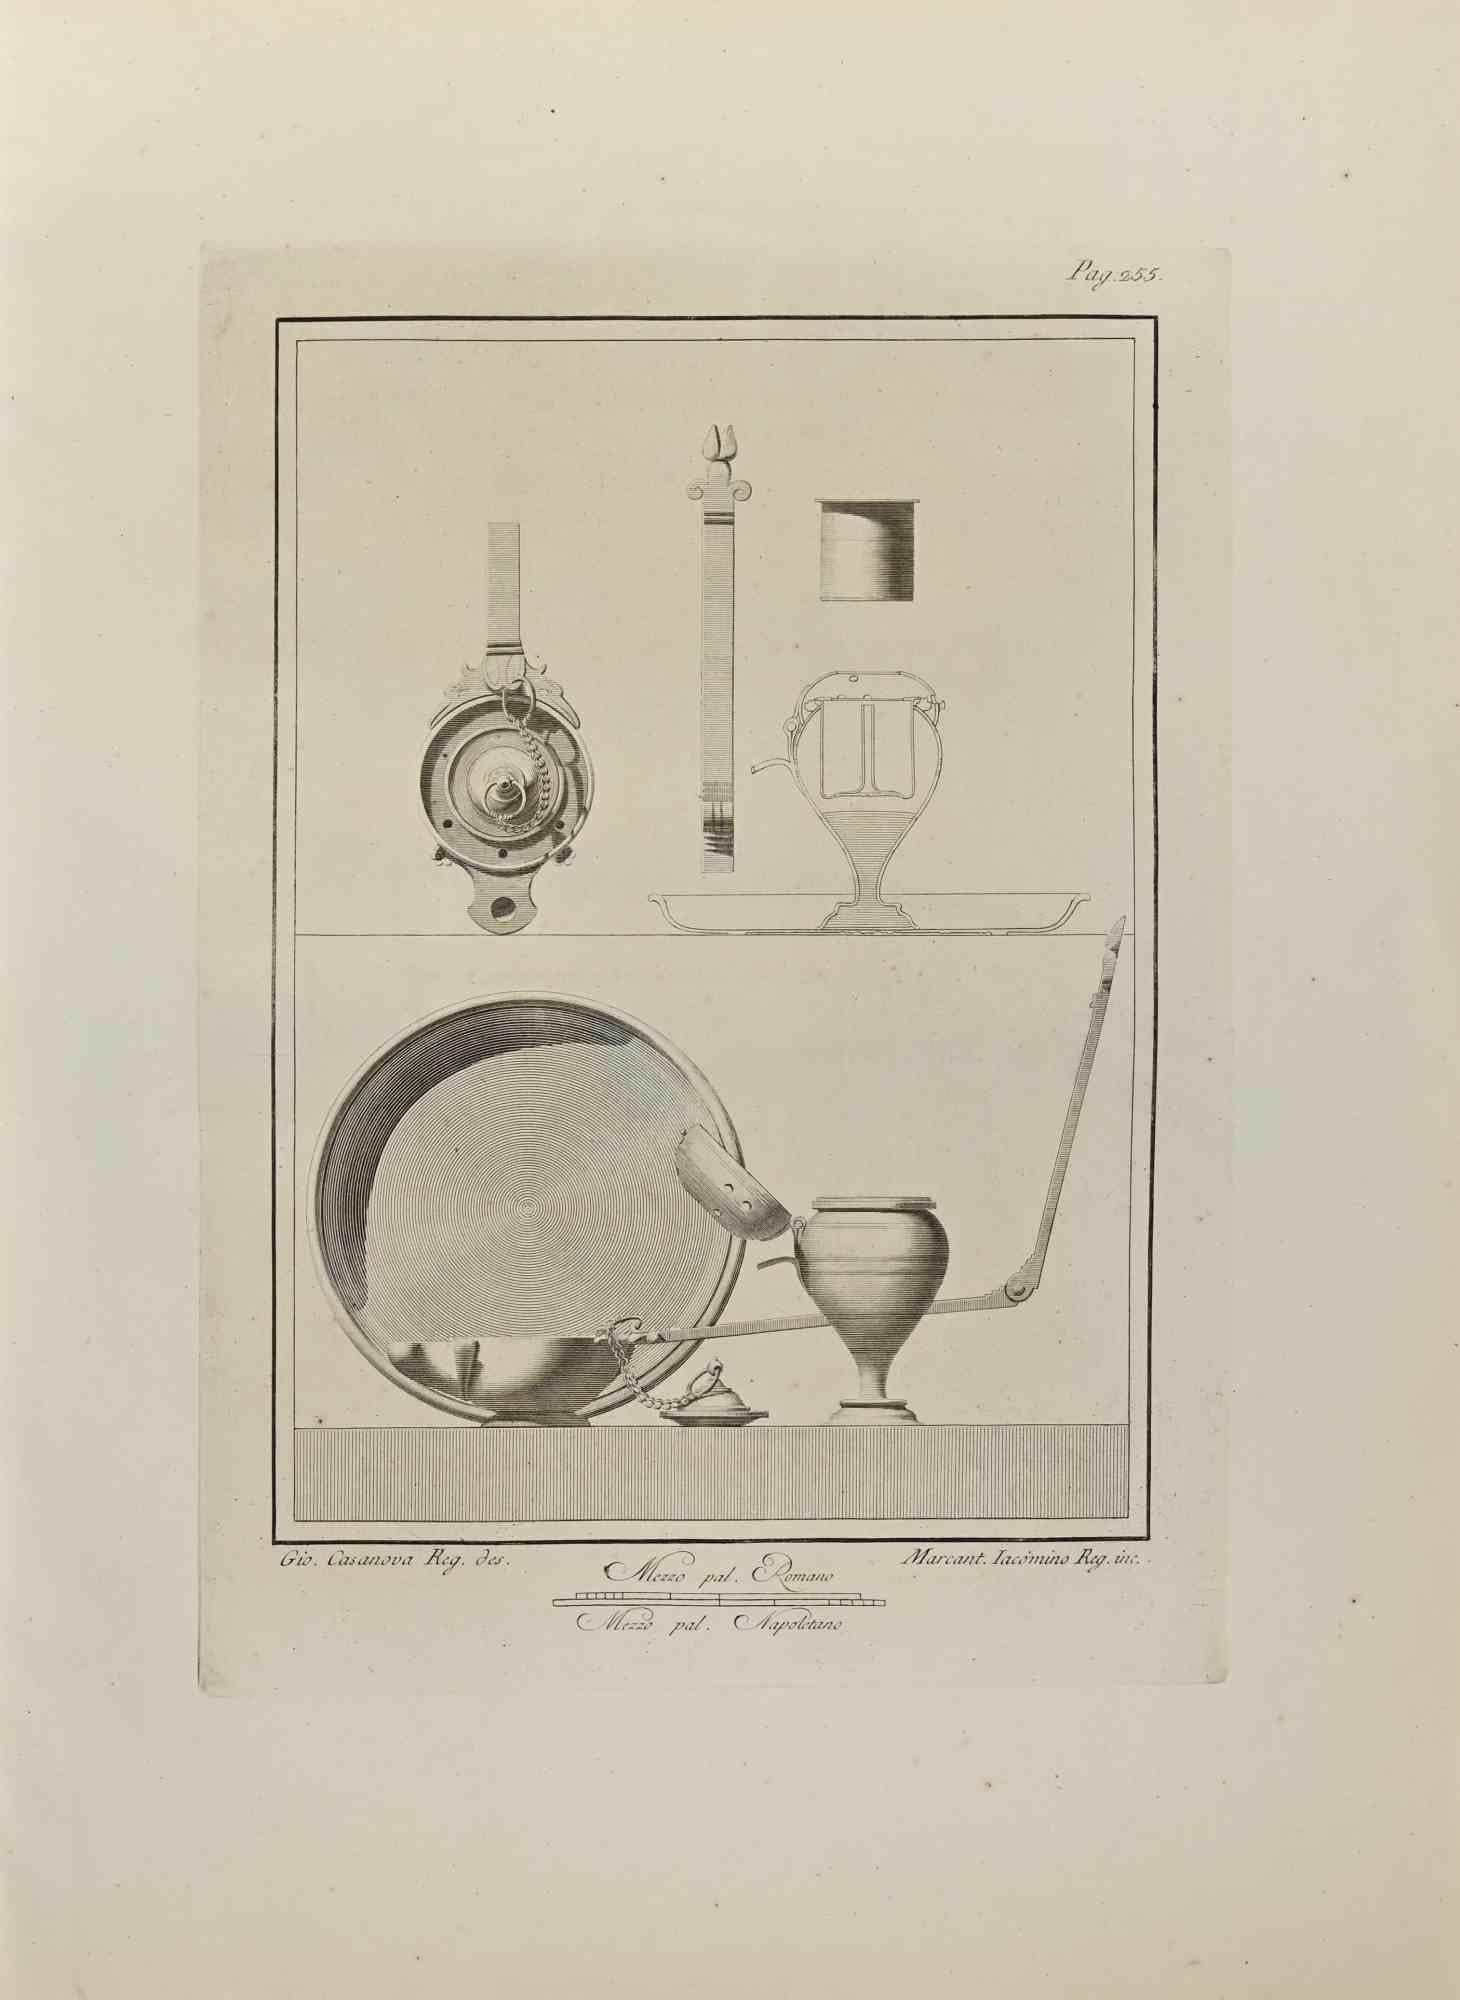 Still Life from "Antiquities of Herculaneum" is an etching on paper realized by Giacomo Casanova in the 18th Century.

Signed on the plate.

Good conditions.

The etching belongs to the print suite “Antiquities of Herculaneum Exposed” (original